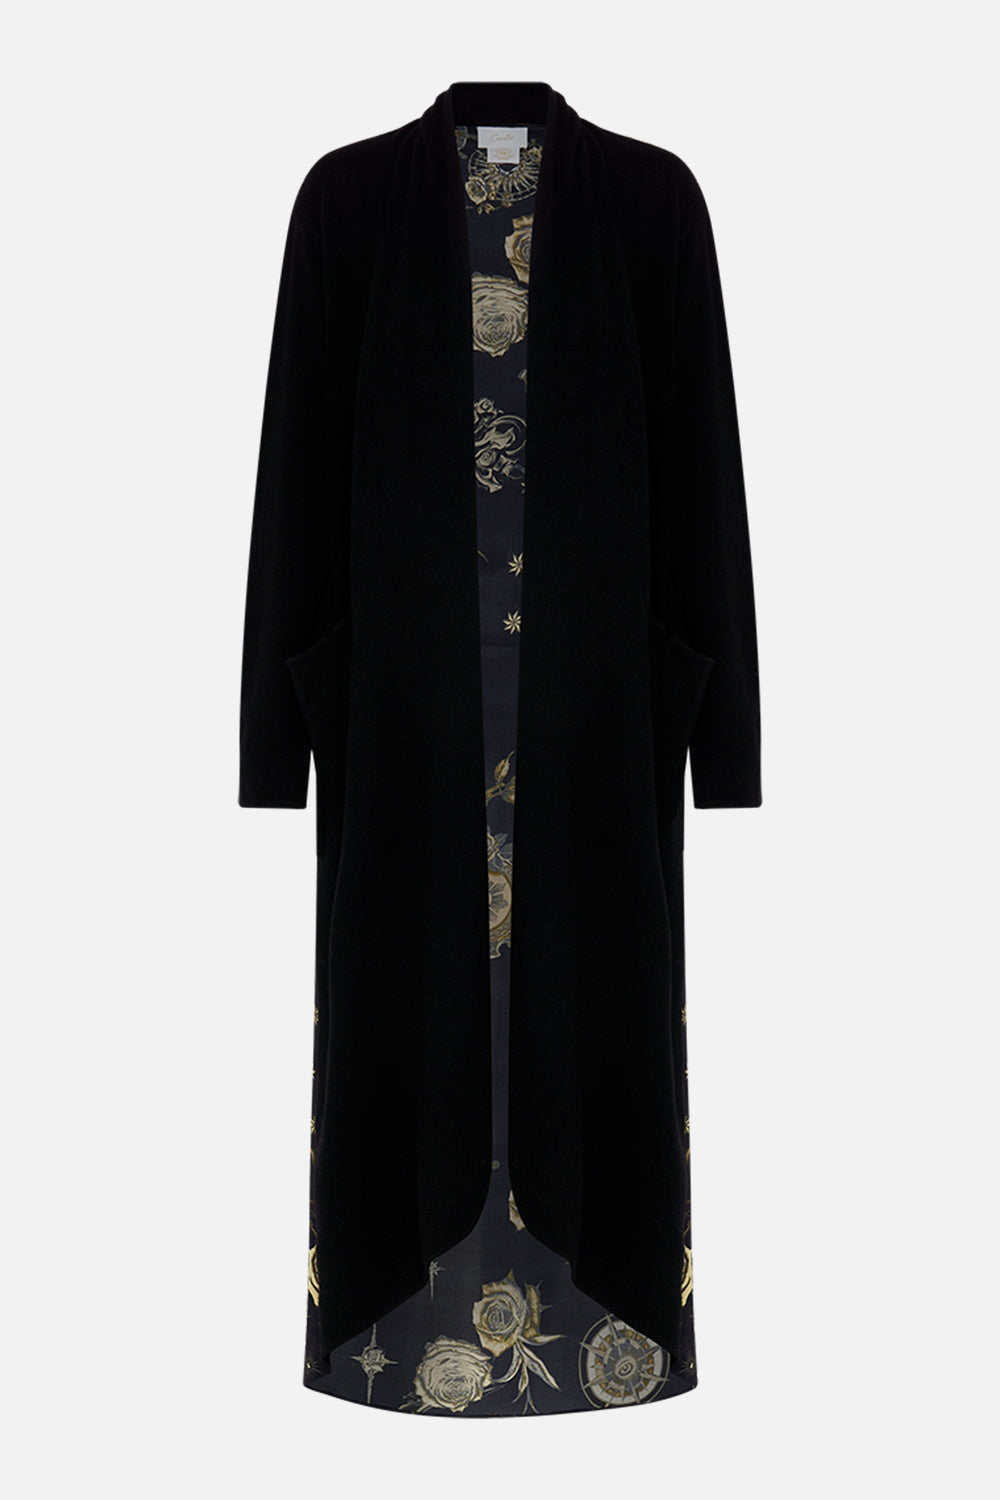 CAMILLA black knitted casual jacket with silk back in So Says The Oracle print.